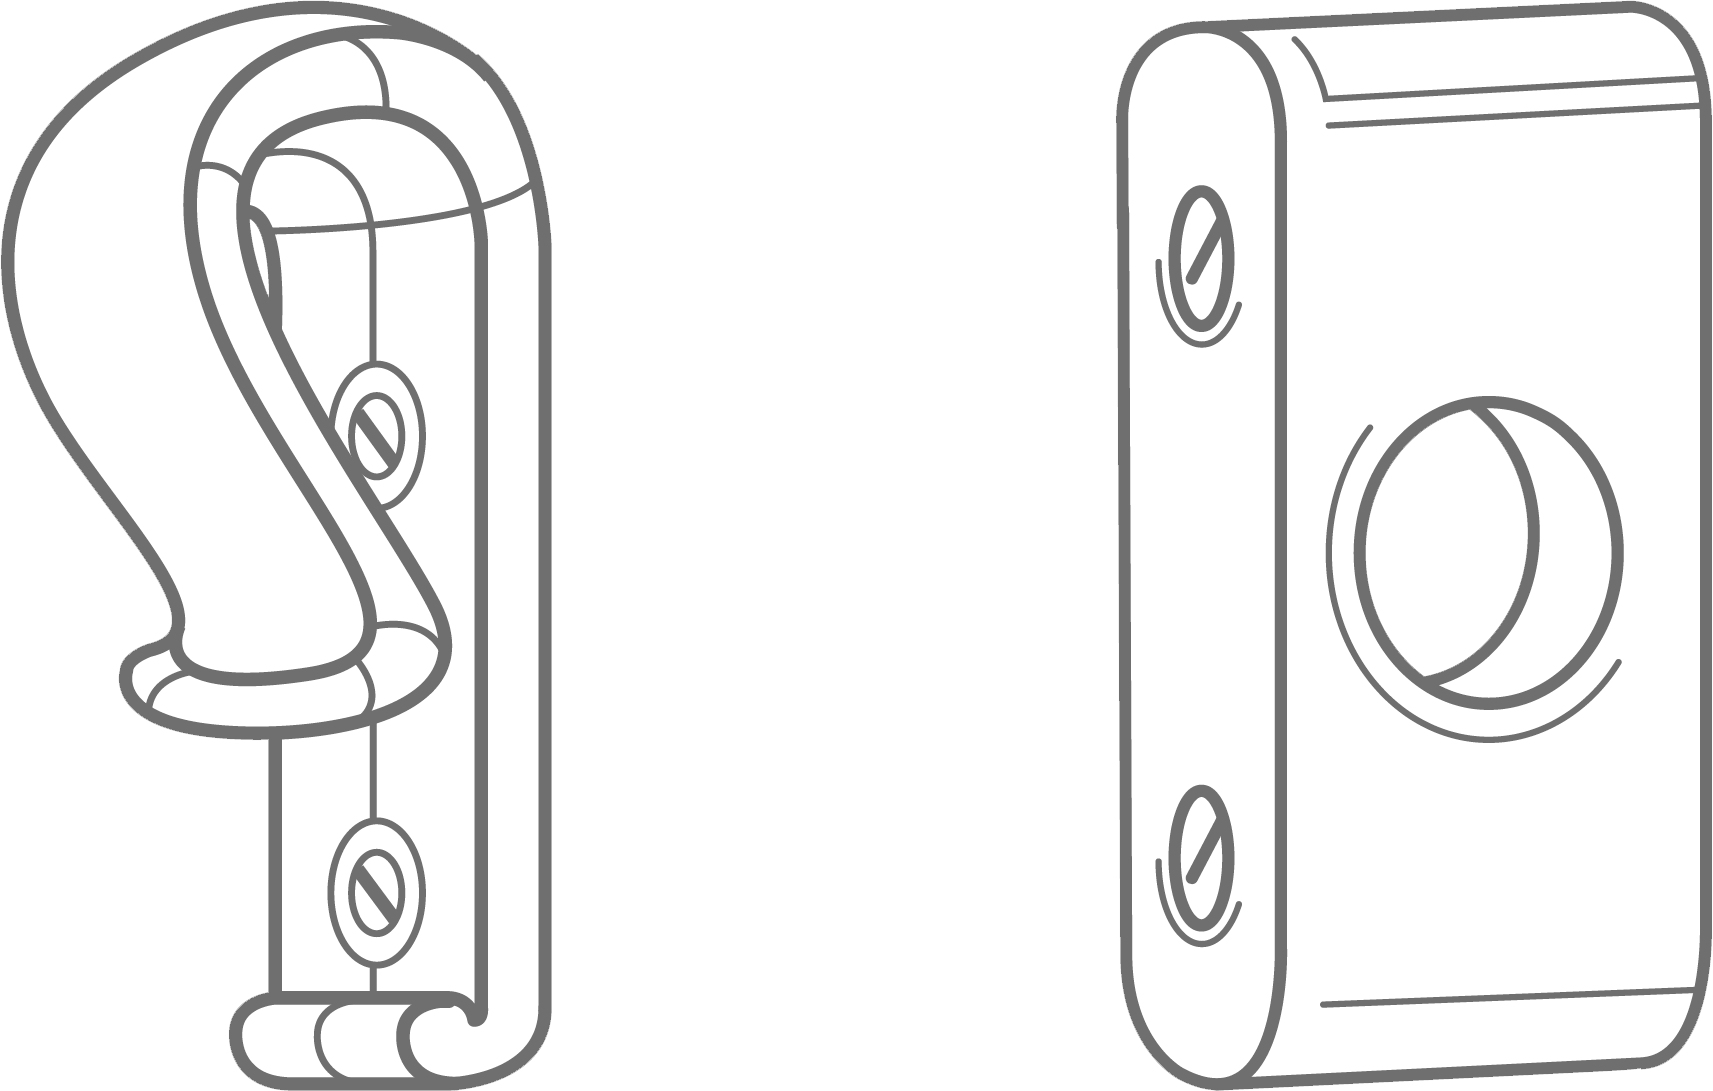 The outline of a child safety clip